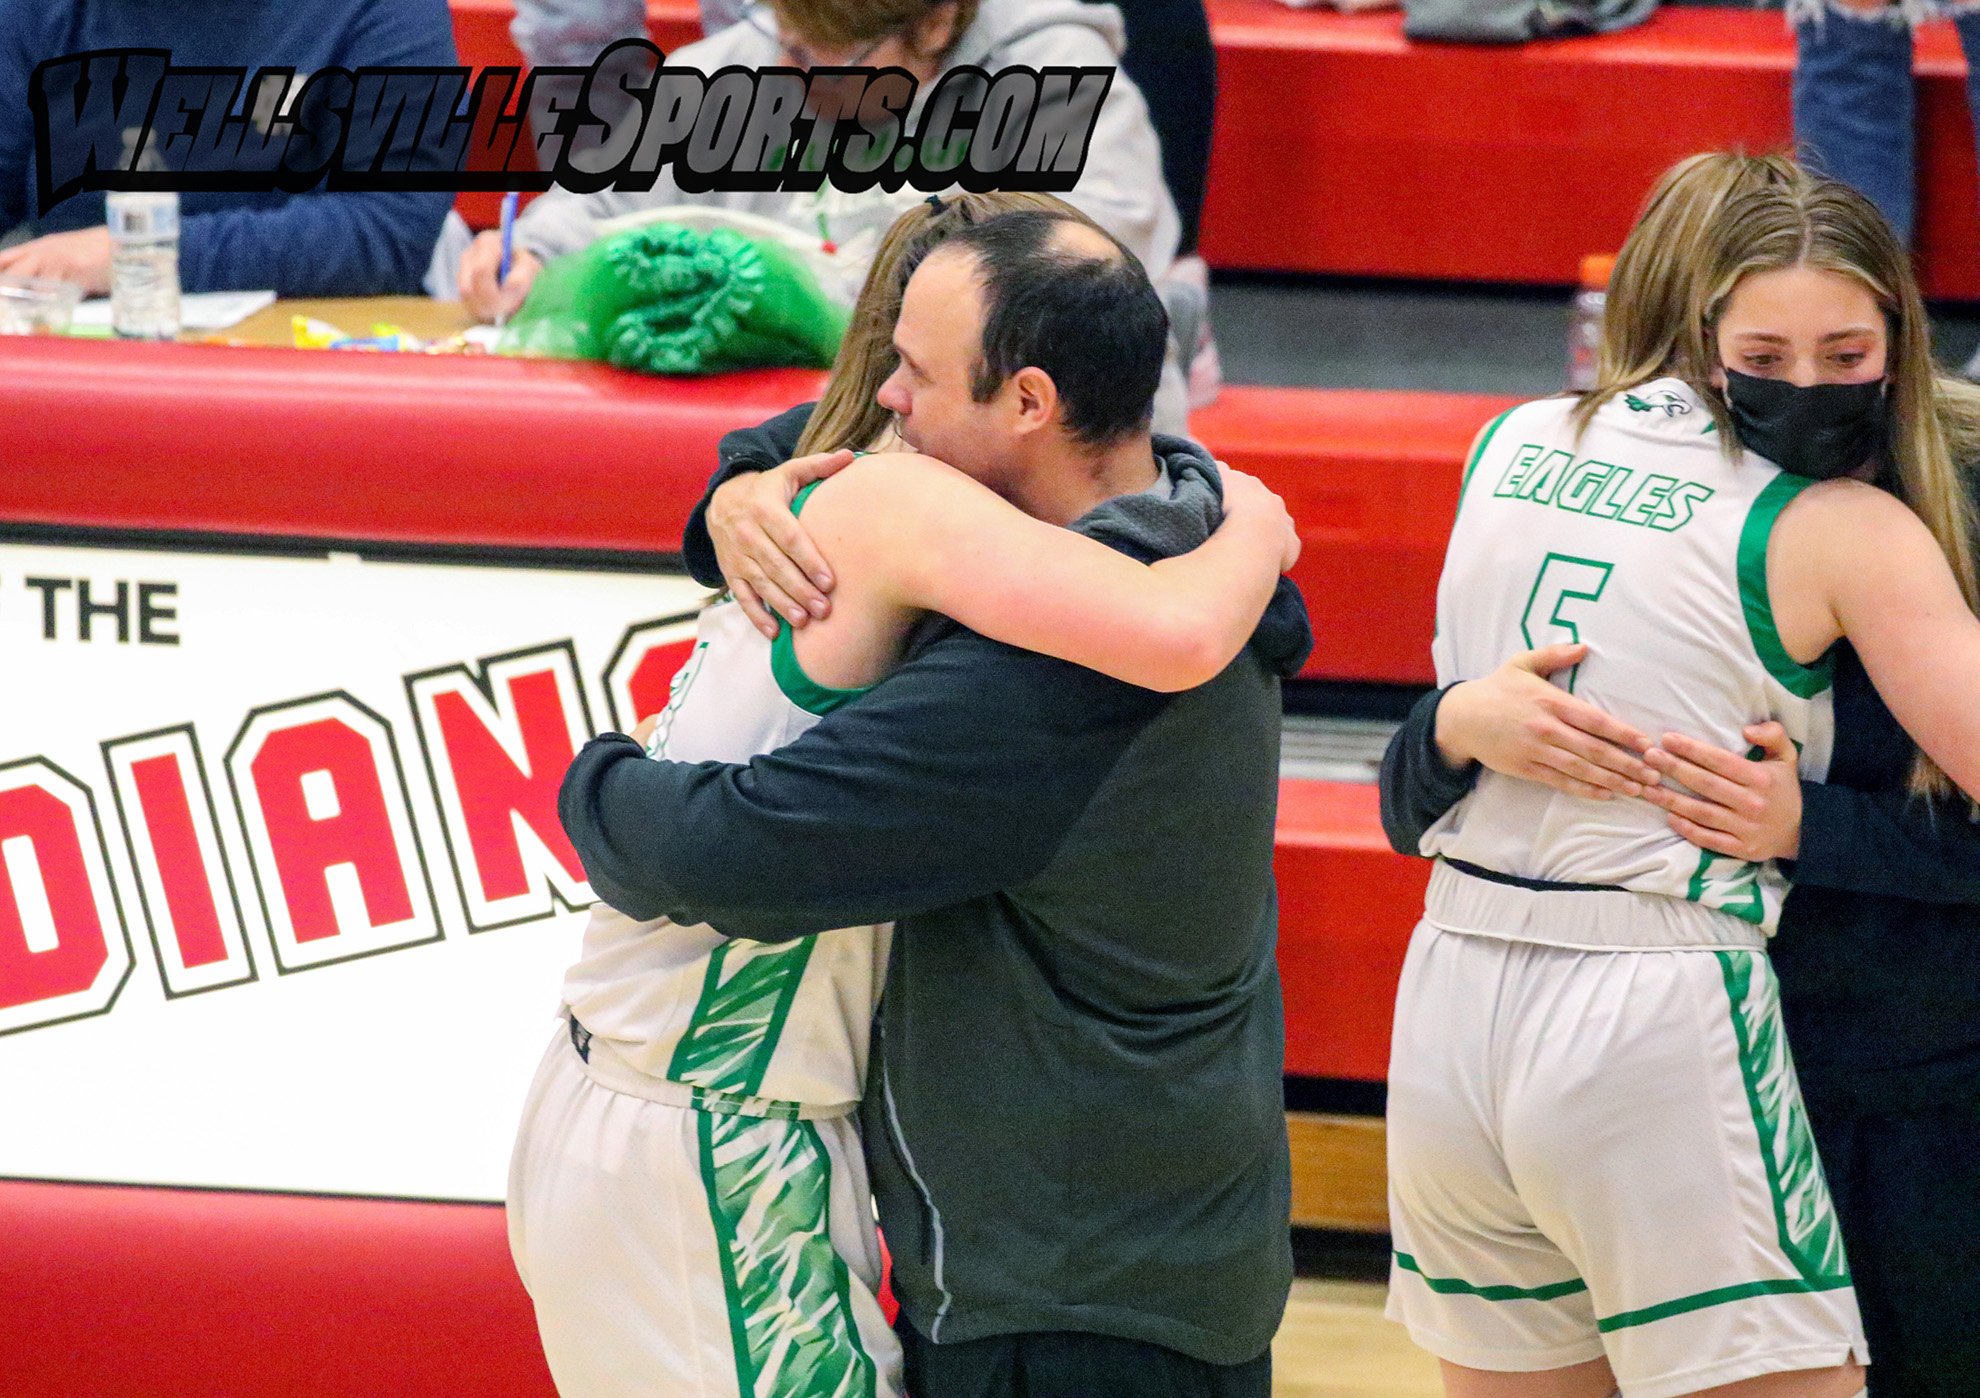  Fillmore head coach Tom Parks, middle, shares a long embrace with his Senior, Emma Cole, (3) after the team fell to eventual Class D1 Champion Notre Dame-Batavia on Friday in the Class D1 Finals at Letchworth. The Lady Eagles wrap up an amazing 2021